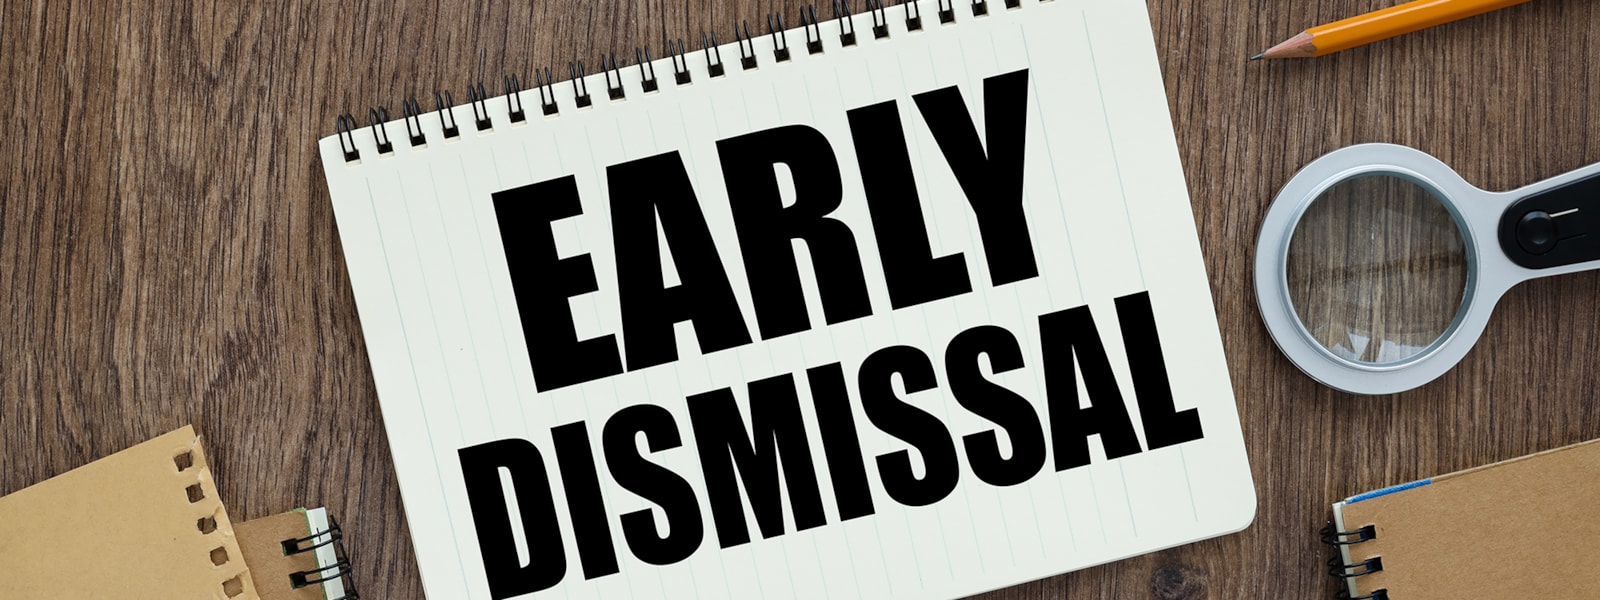 Early Dismissal Sign 